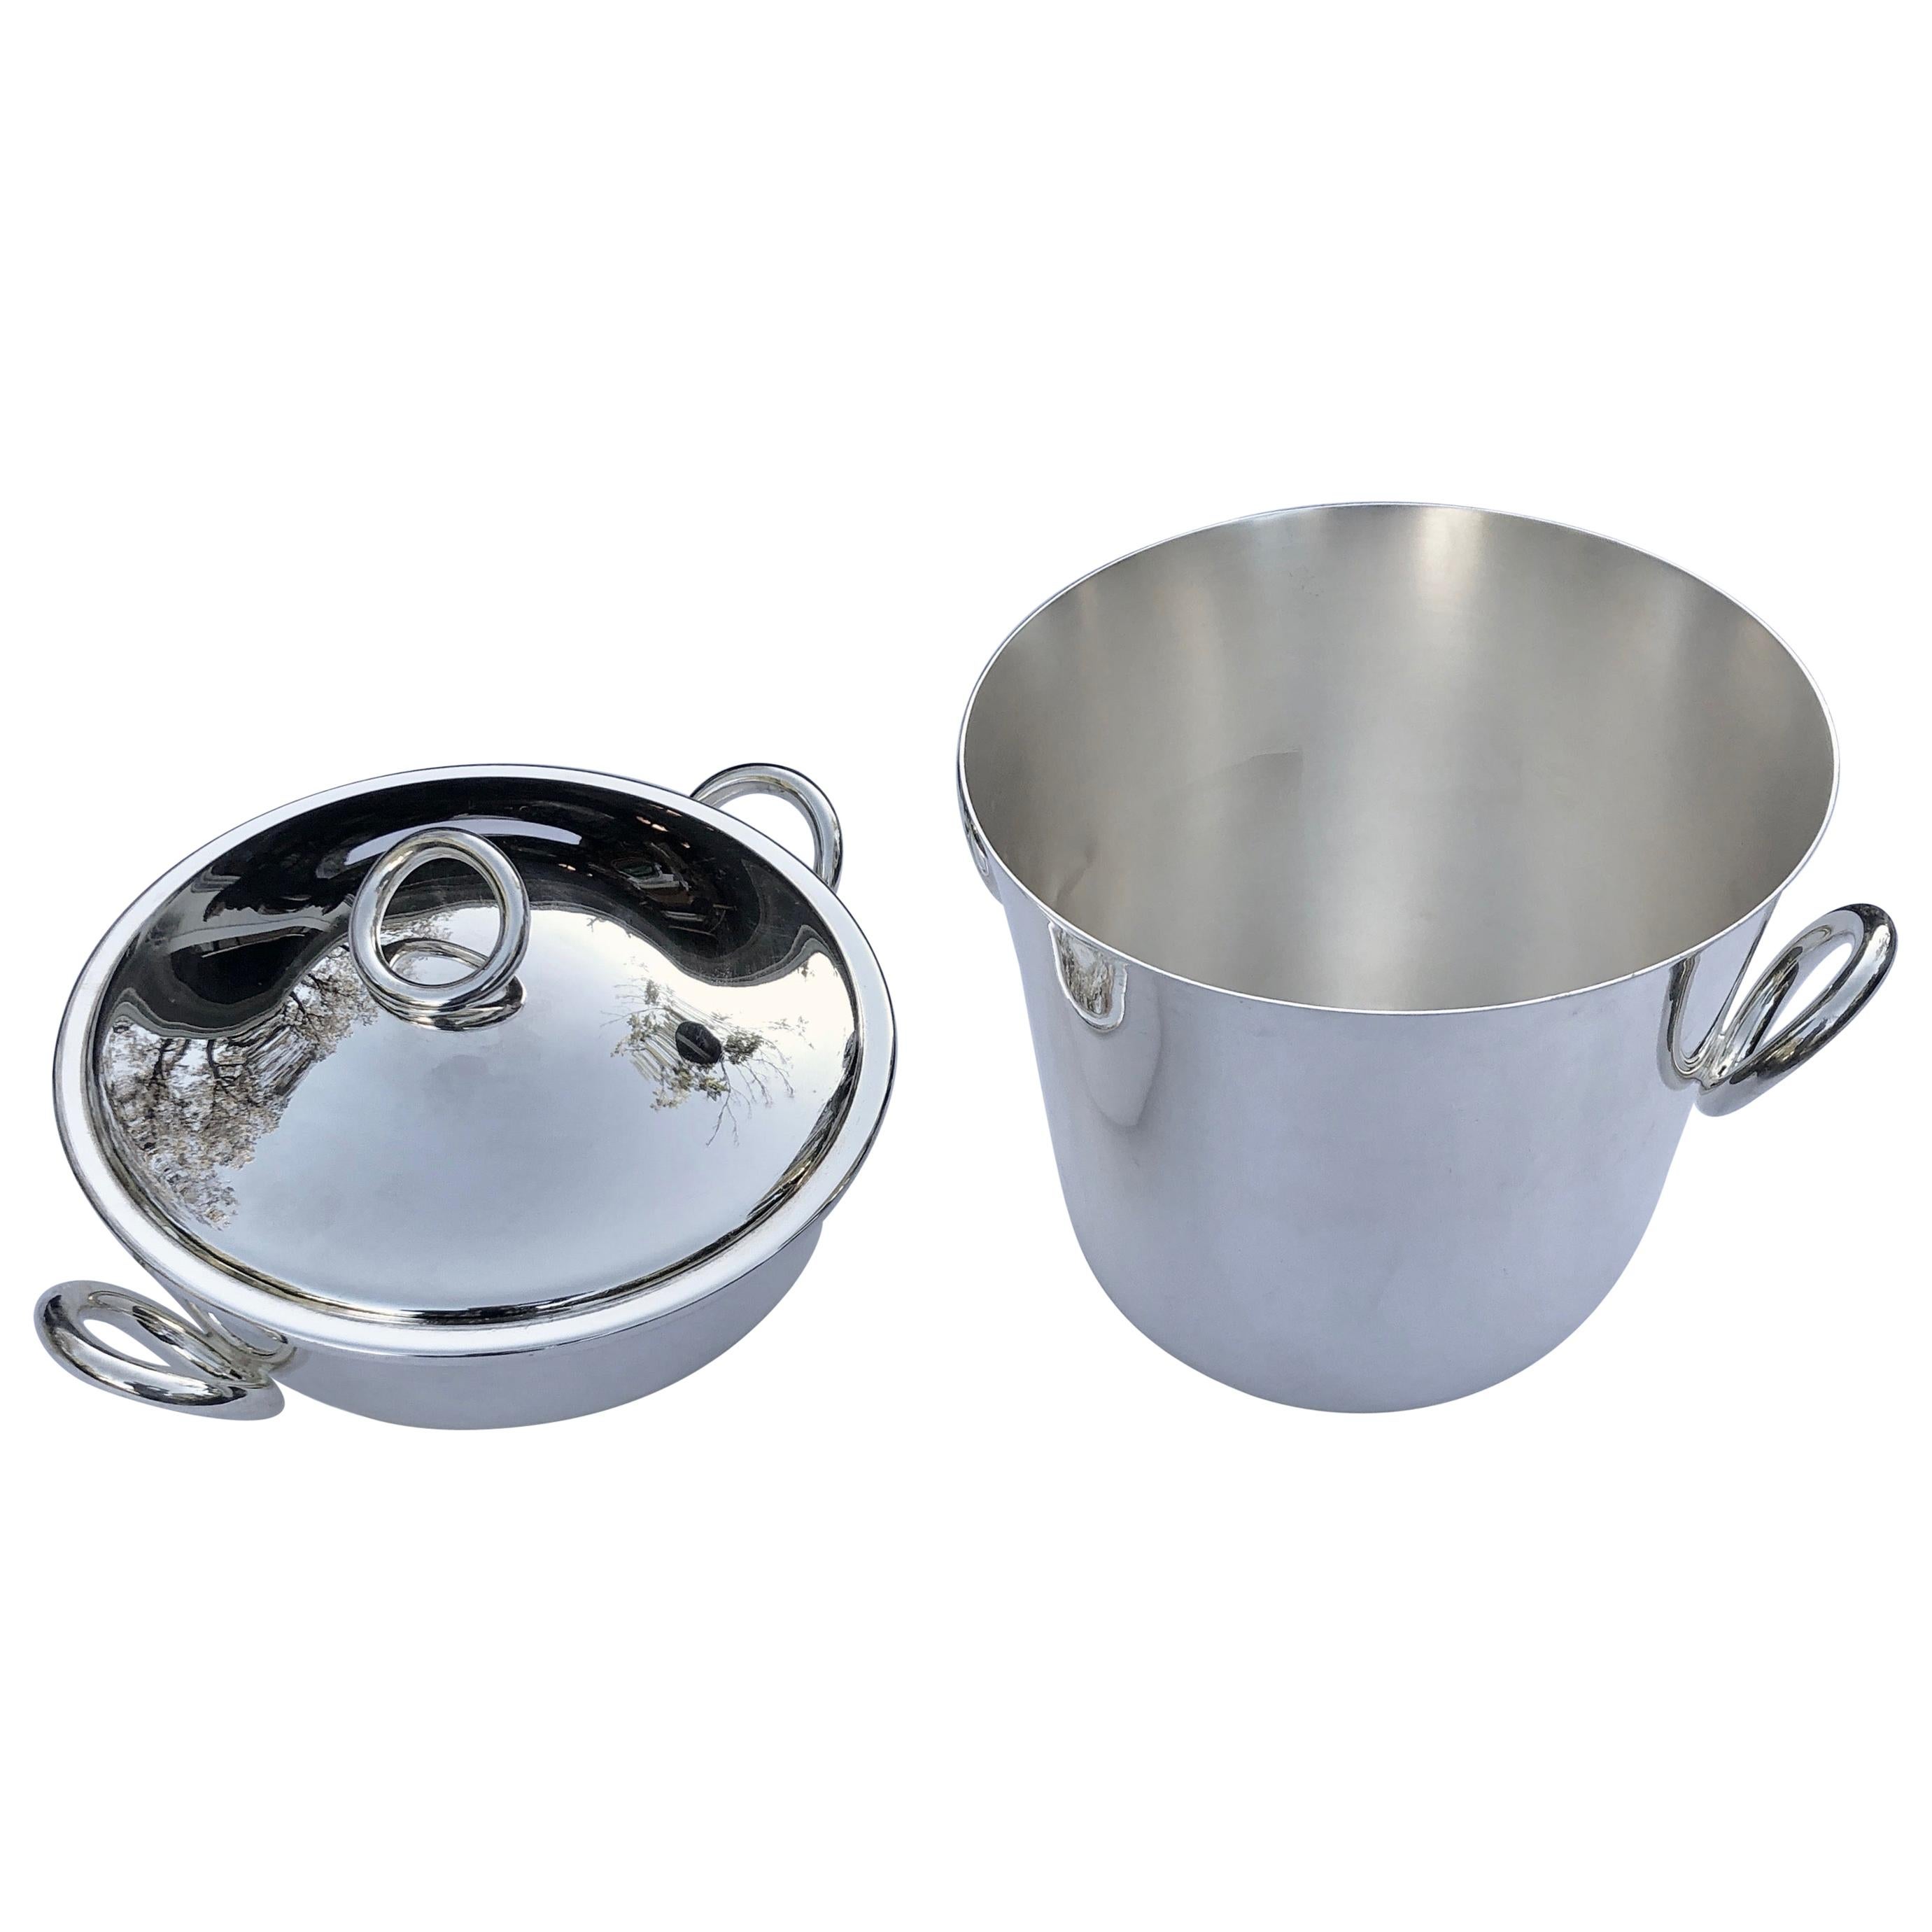 French Christofle Silver Plated Vegetable Dish and Champagne/Wine Cooler Vertigo For Sale